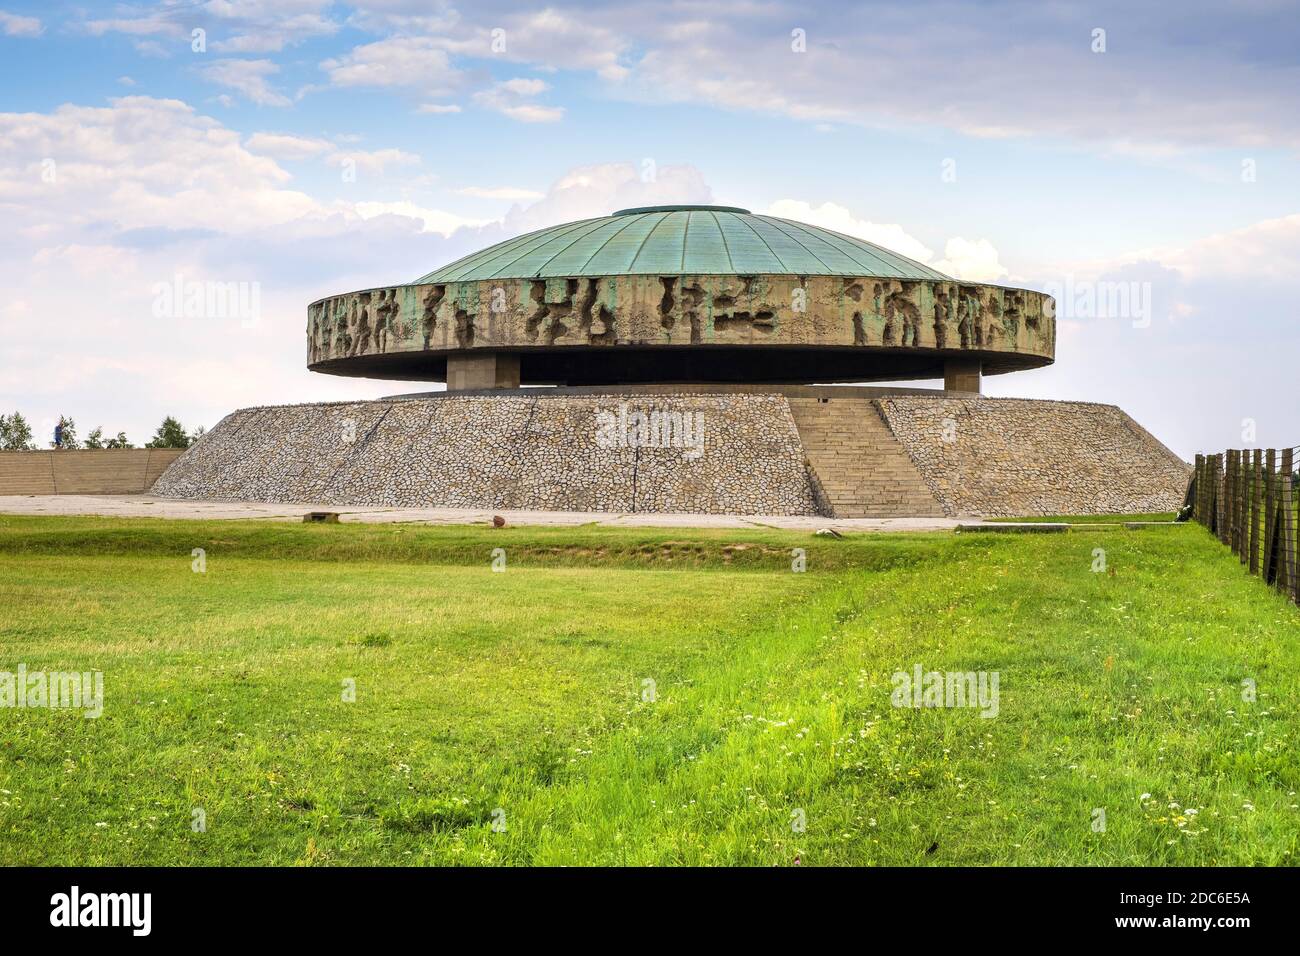 Lublin, Lubelskie / Poland - 2019/08/17: Mausoleum of Majdanek KL Lublin Nazis concentration and extermination camp - Konzentrationslager Lublin - by Stock Photo